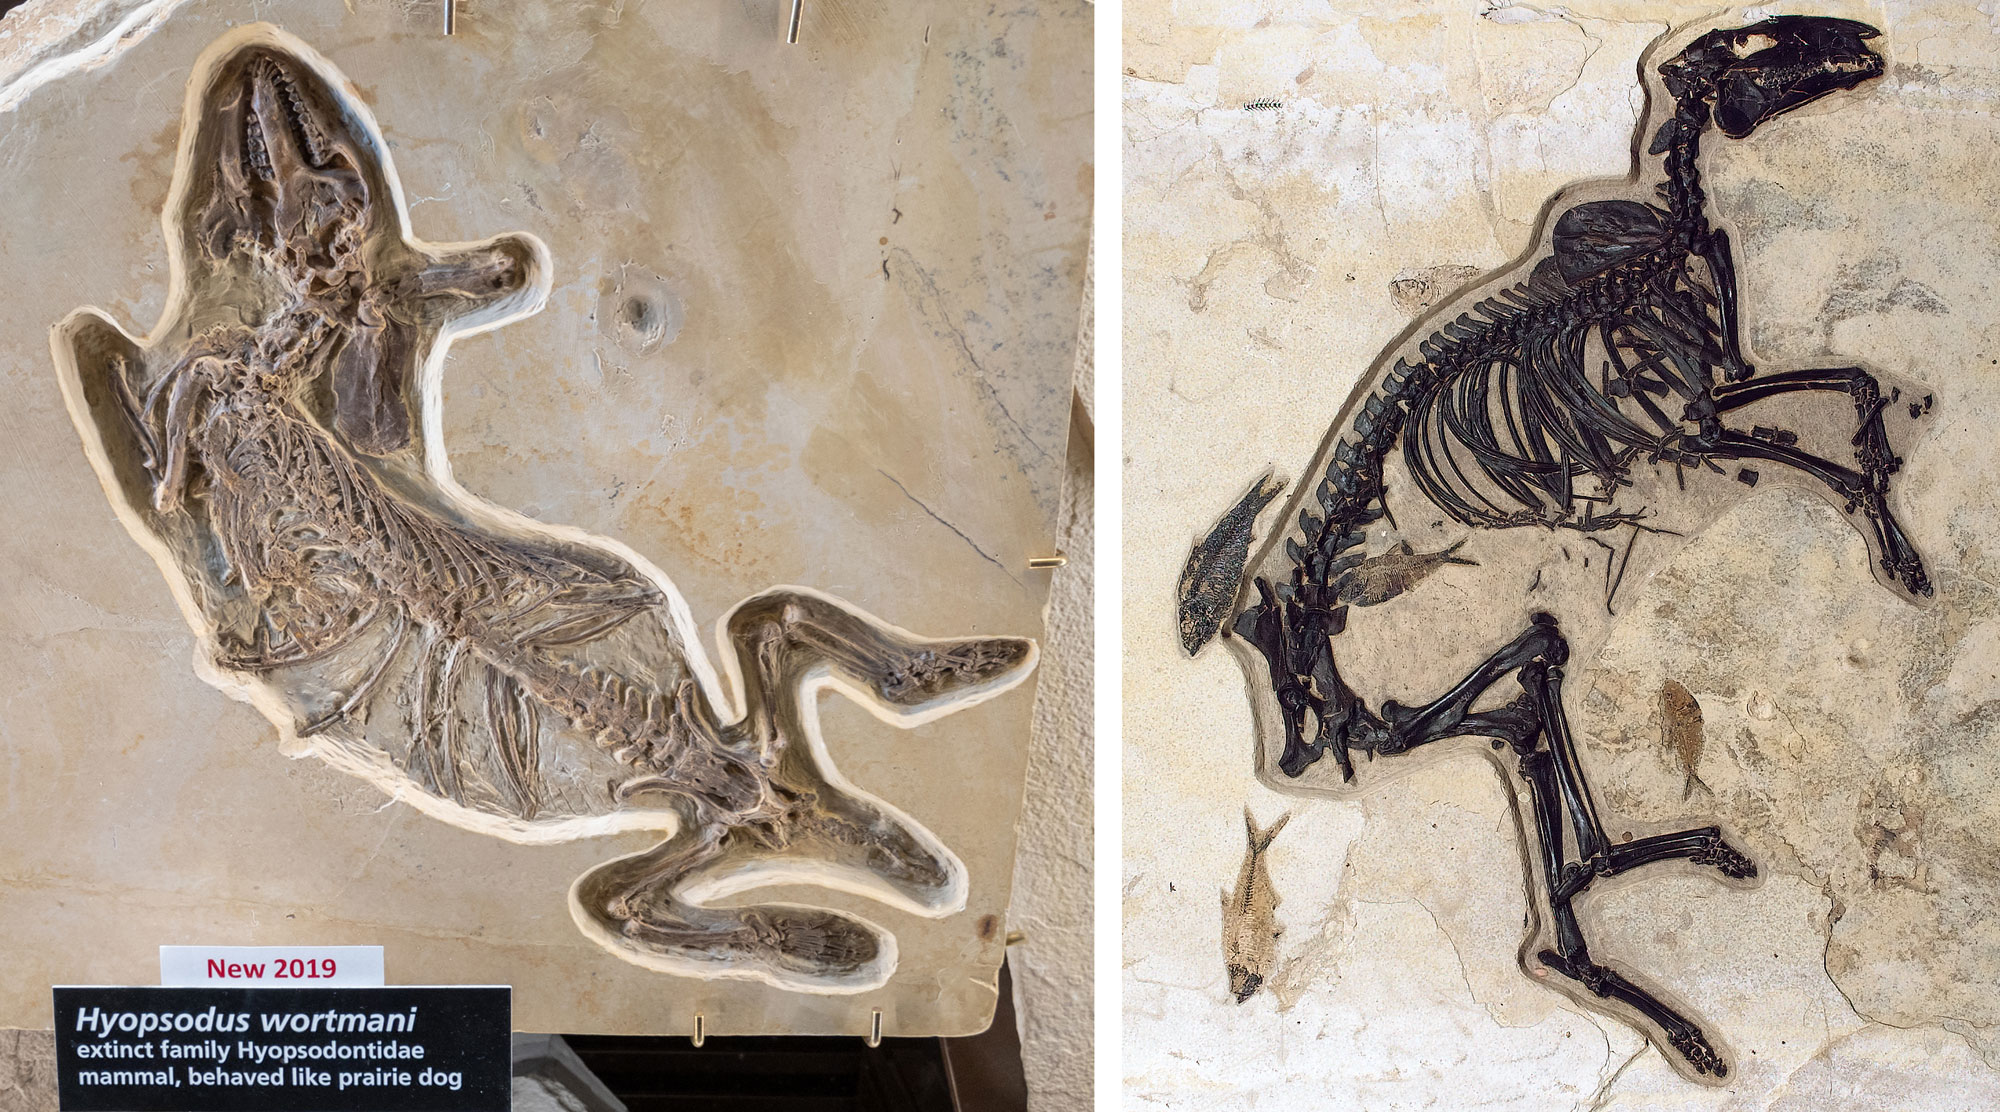 2-panel image of photographs of fossil land mammals from Eocene Fossil Lake, Wyoming. Panel 1: Relatively complete fossil skeleton of a condylarth preserved in a slab of beige rock. The animal is on its back with its legs splayed out. Its tail is short. Panel 2: Nearly complete skeleton of an ancient fossil horse preserved in a slab of beige rock. The horse is preserved on its side with most bones apparently in life position. Five fossil fish are preserved near the skeleton.